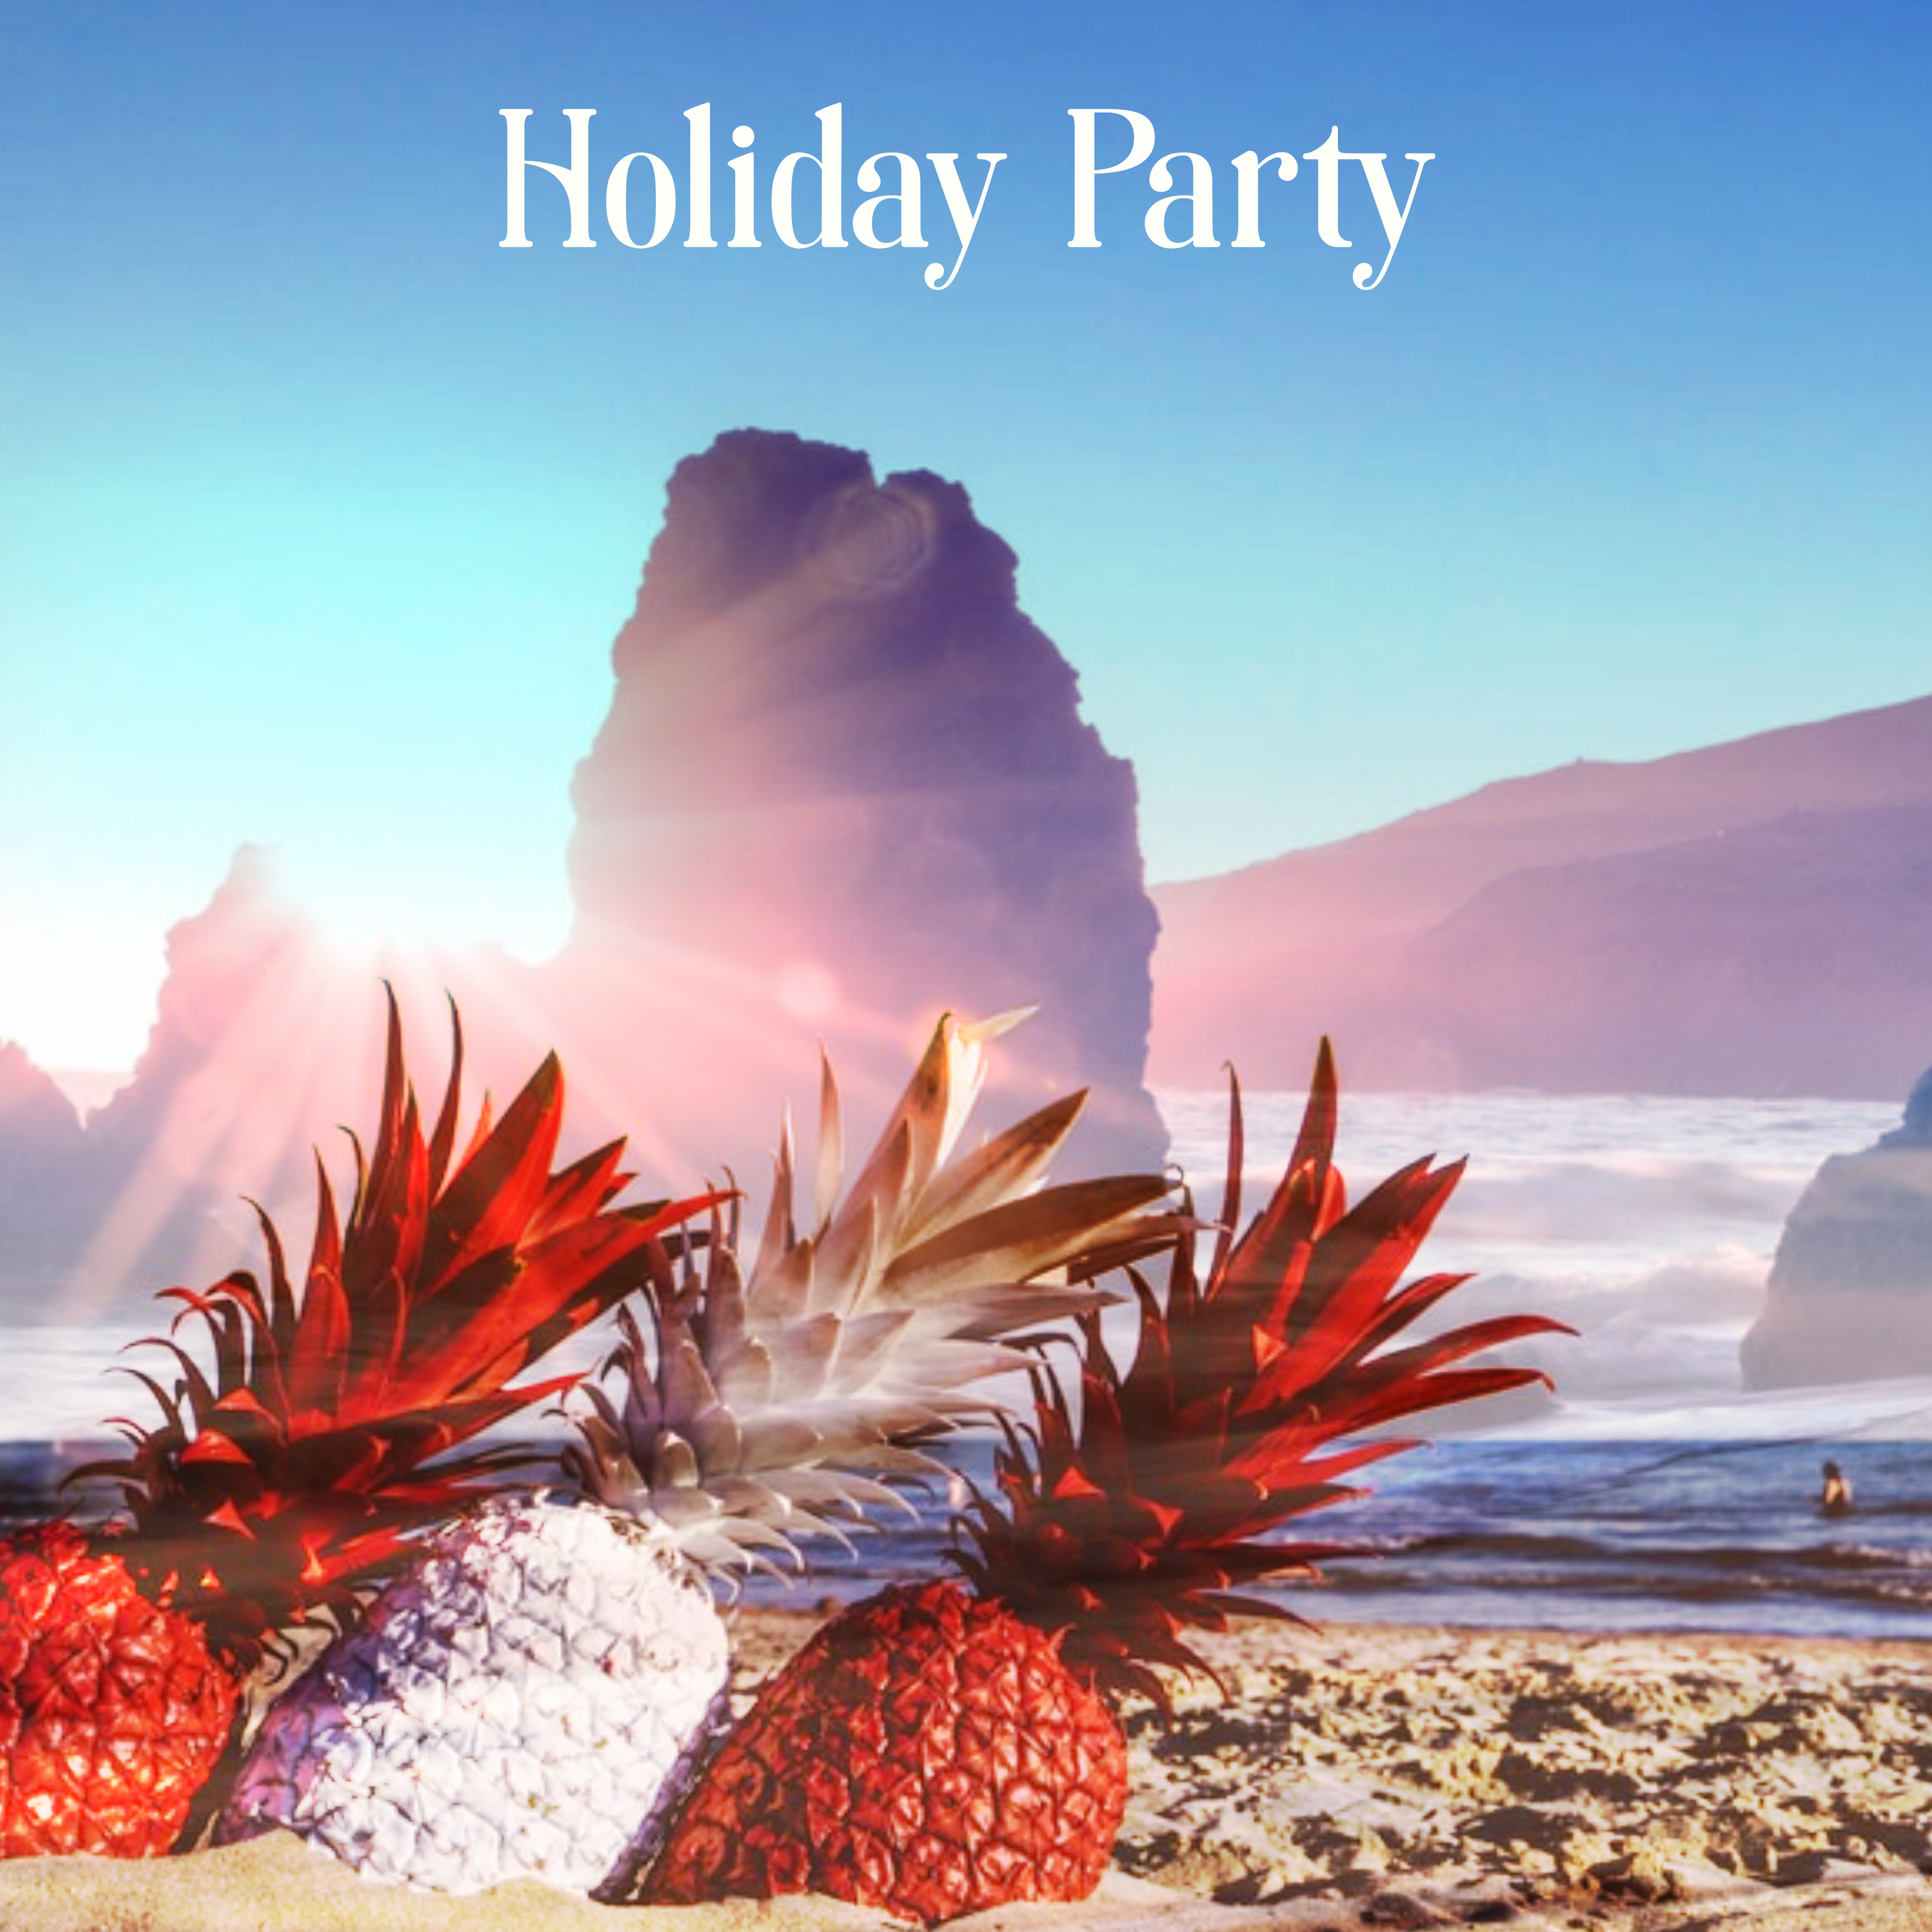 Holiday Party – Good Drinks, Tropical Water, Green and Blue, Sandy Beach